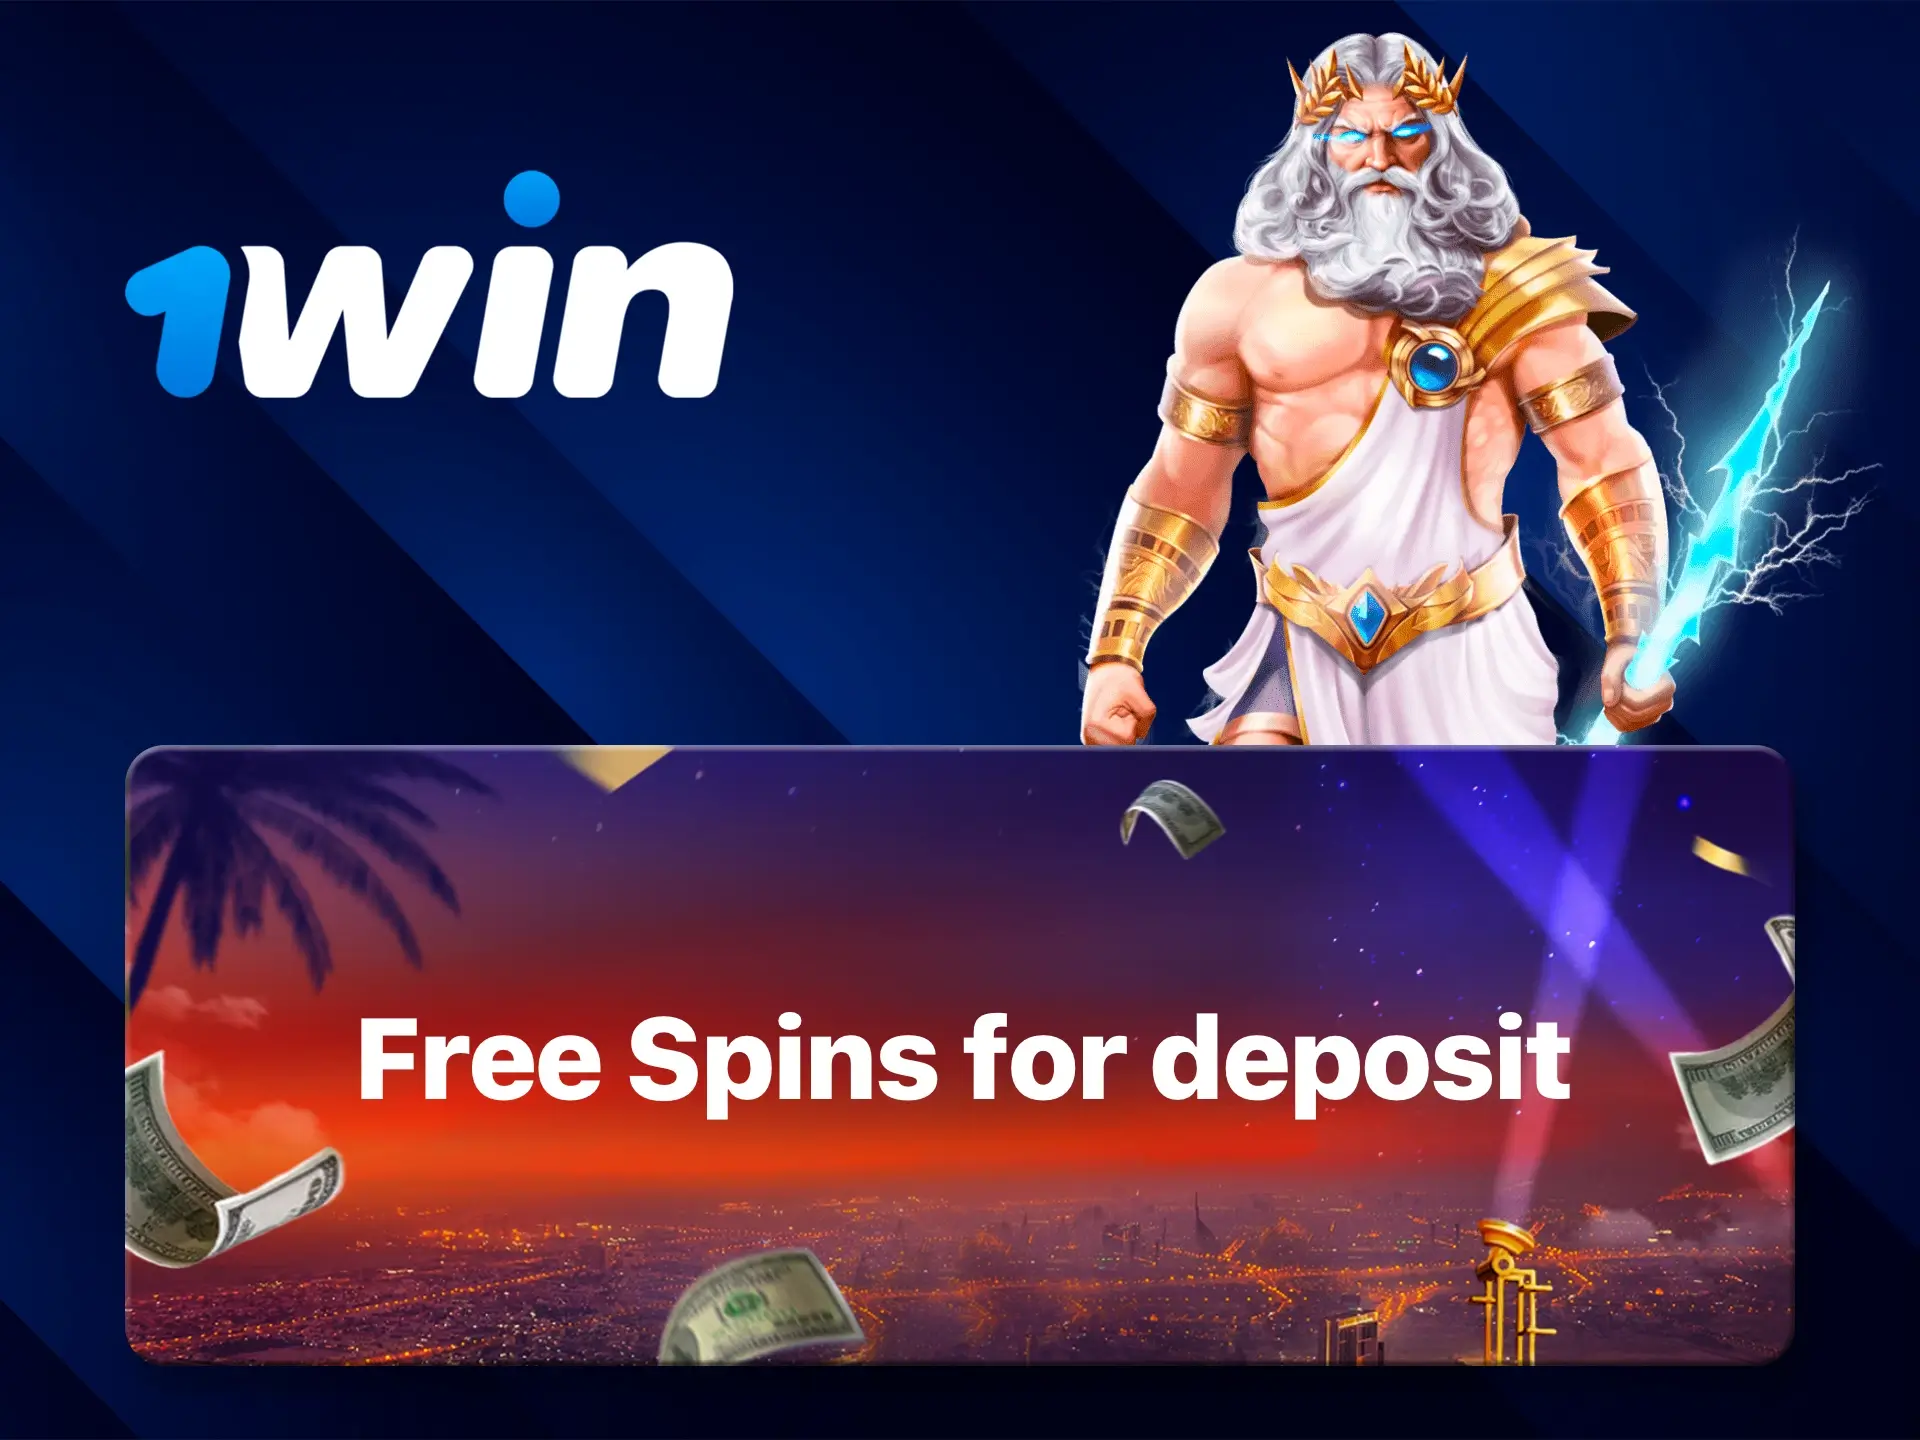 It's very rare to find a casino like 1Win these days, 70 free spins in slots becomes available at the start of your game.